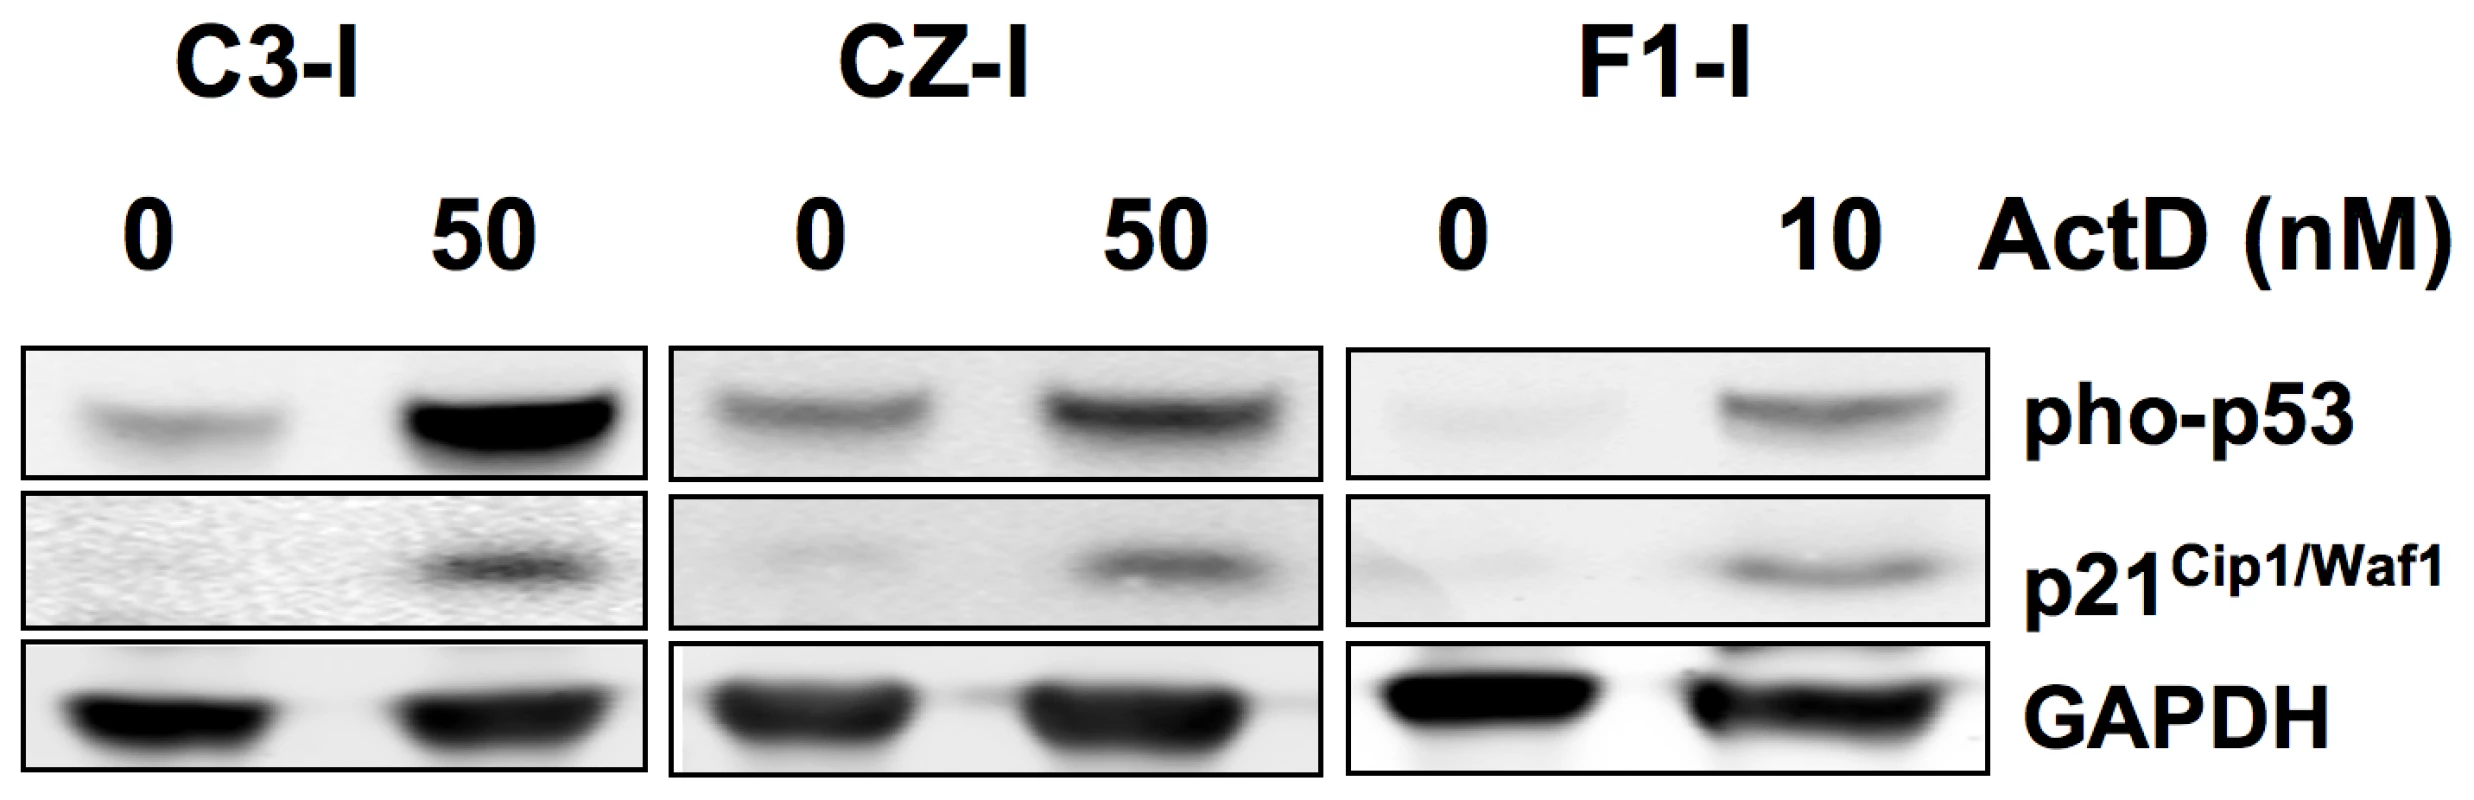 Induction of p53 and p21<sup>Cip1/Waf1</sup> in a DNA damage response in metastatic and non-metastatic bone tumor cell lines.